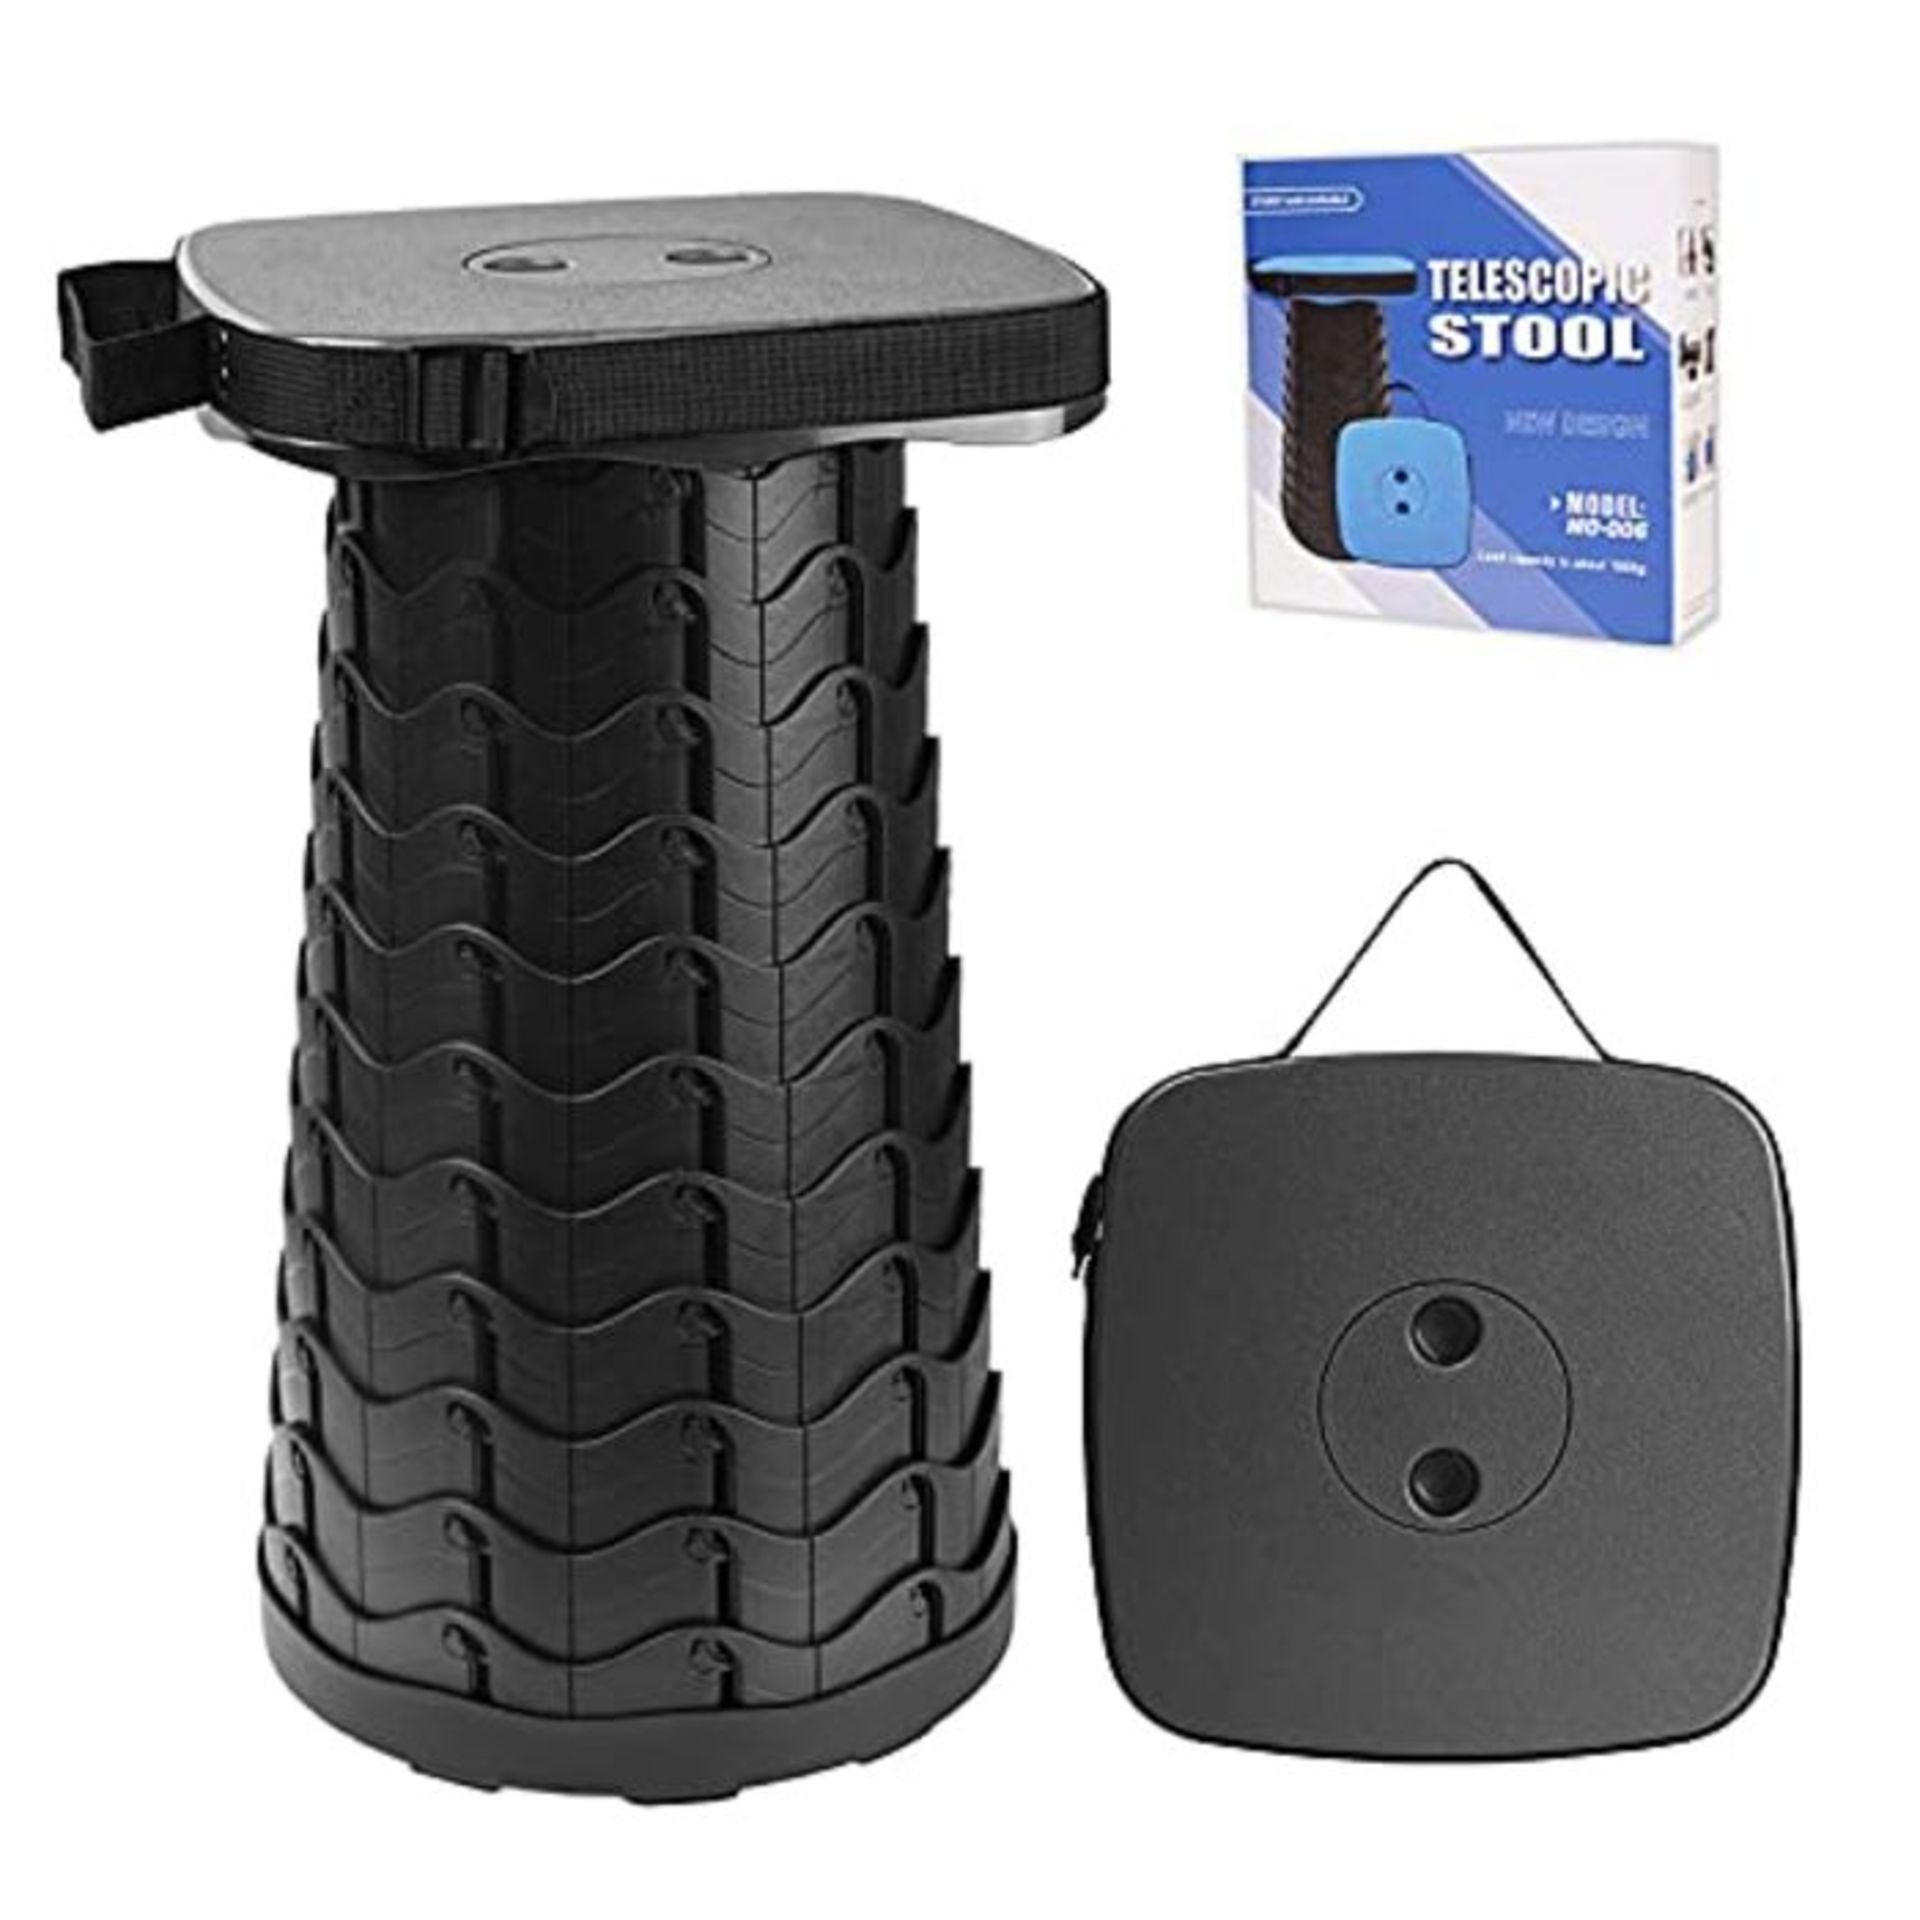 Upgraded Portable Telescopic Stool with Larger Seat - Retractable Square Camping Stool